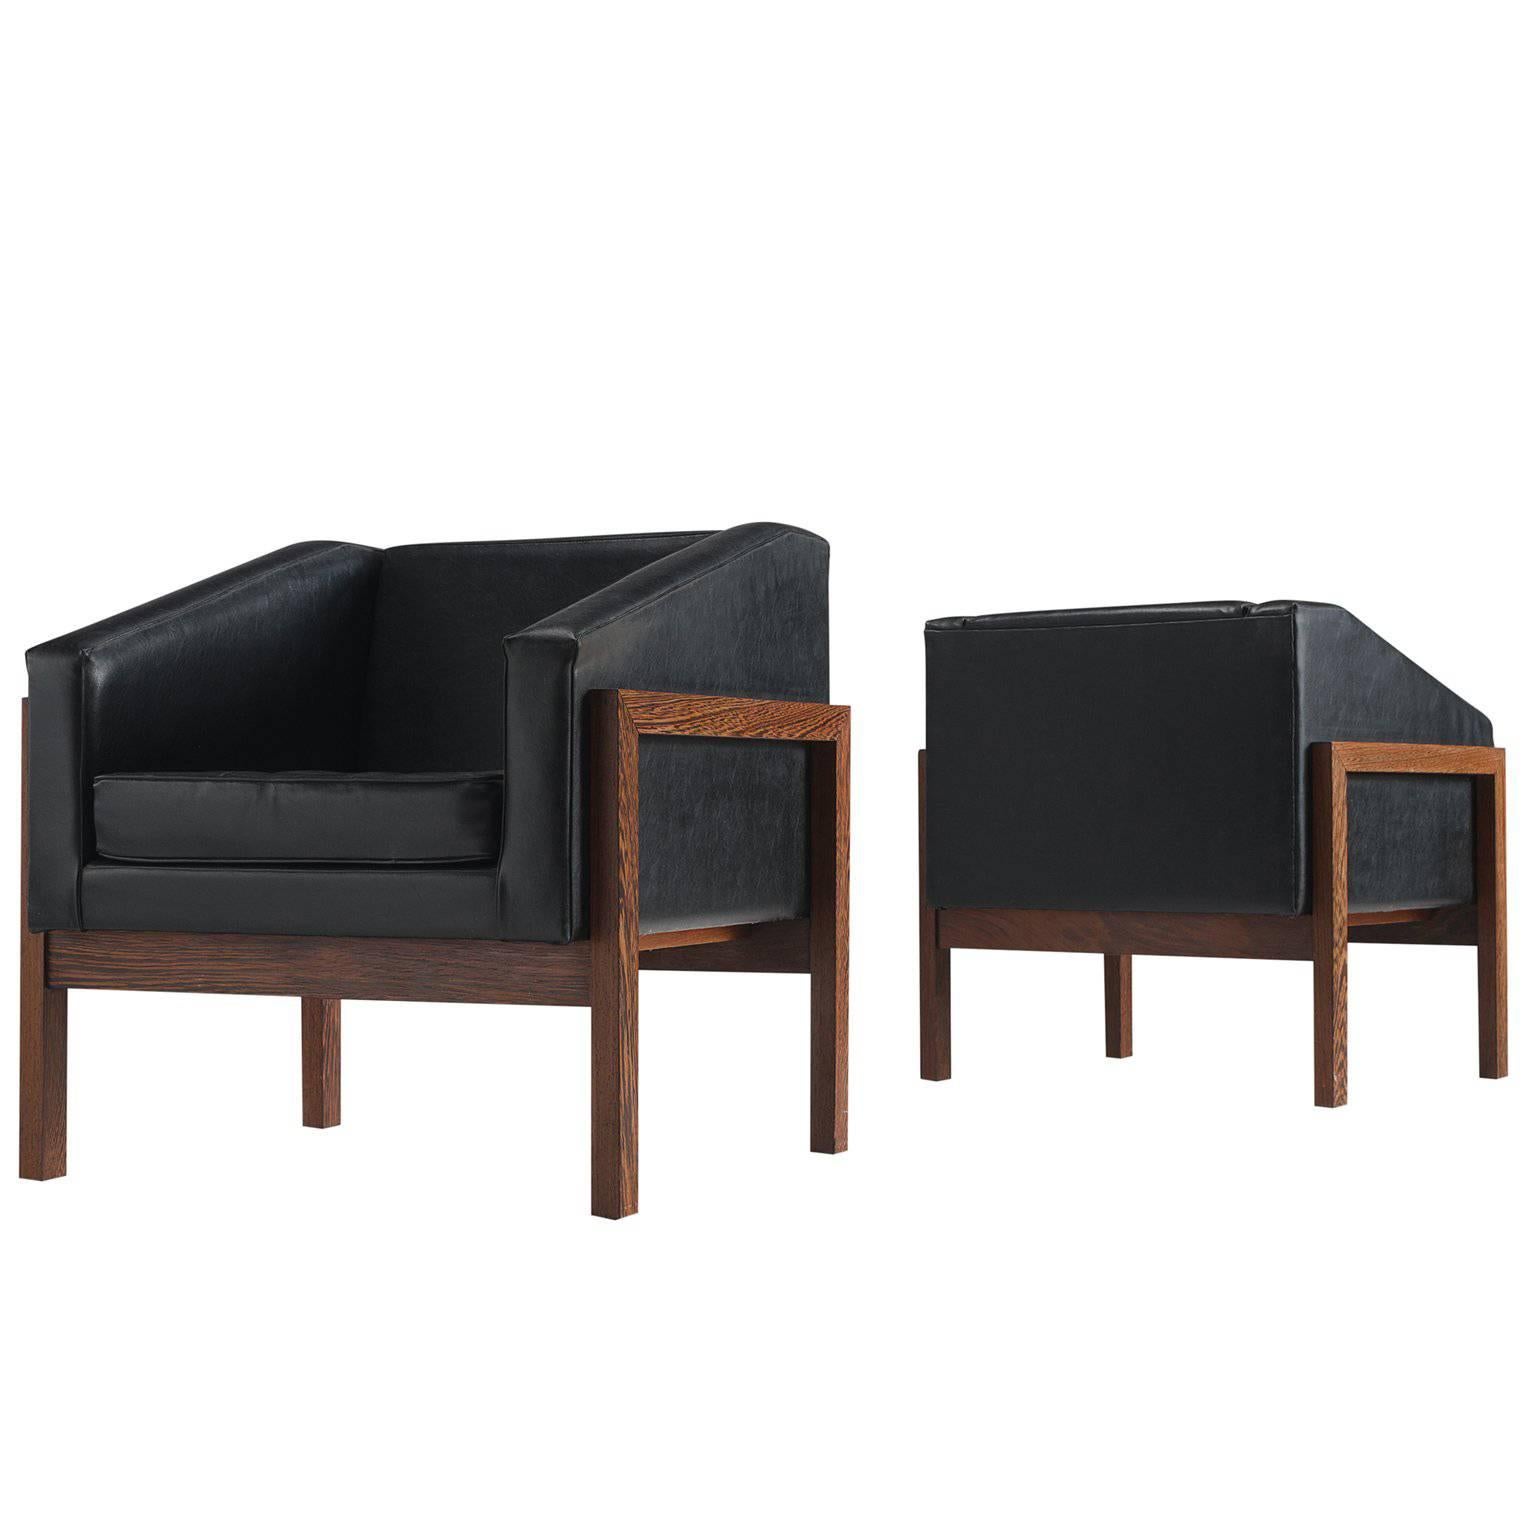 Unique Set of Two Dutch Armchairs by Wim Den Boon